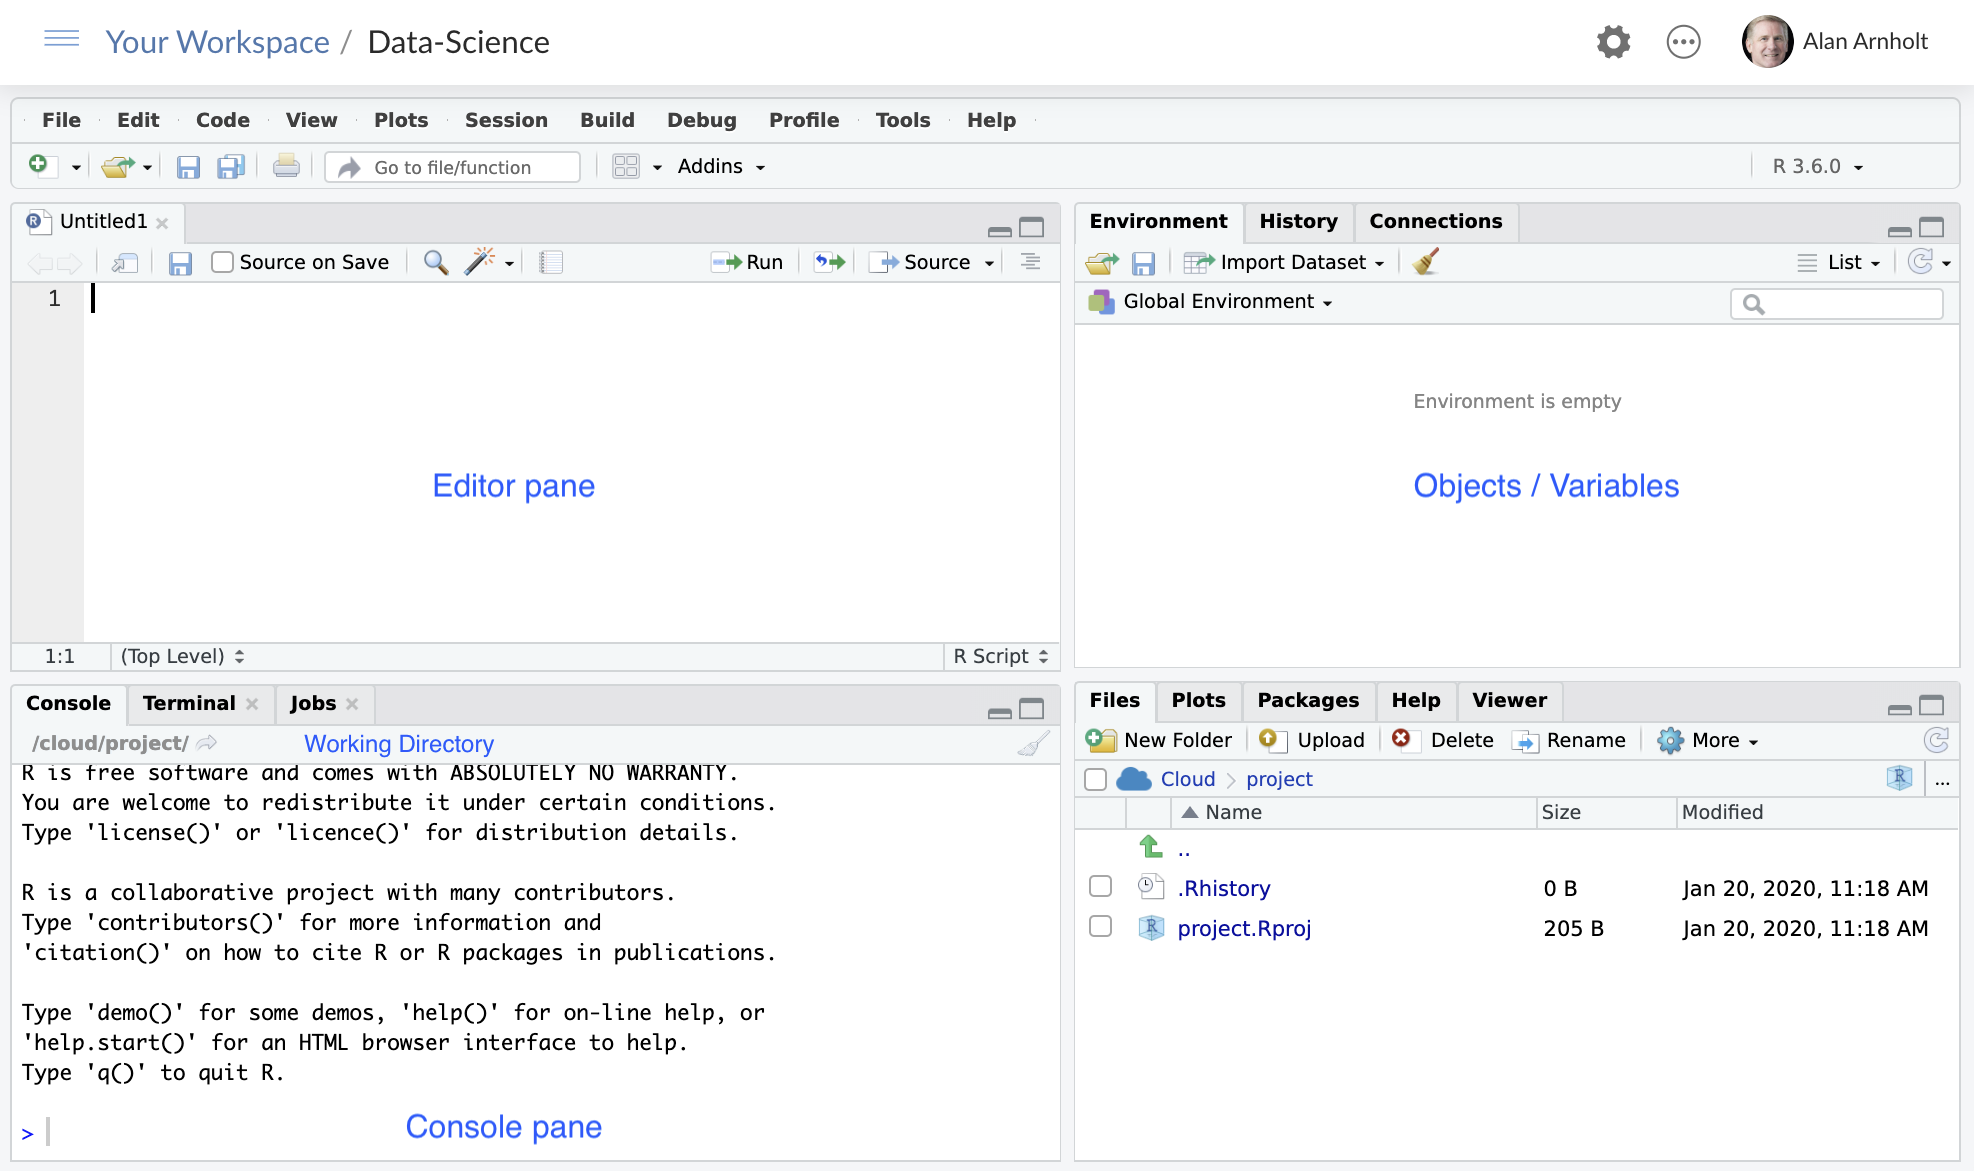 RStudio interface screenshot. Clockwise from top left: Source, Environment/History, Files/Plots/Packages/Help/Viewer, Console.